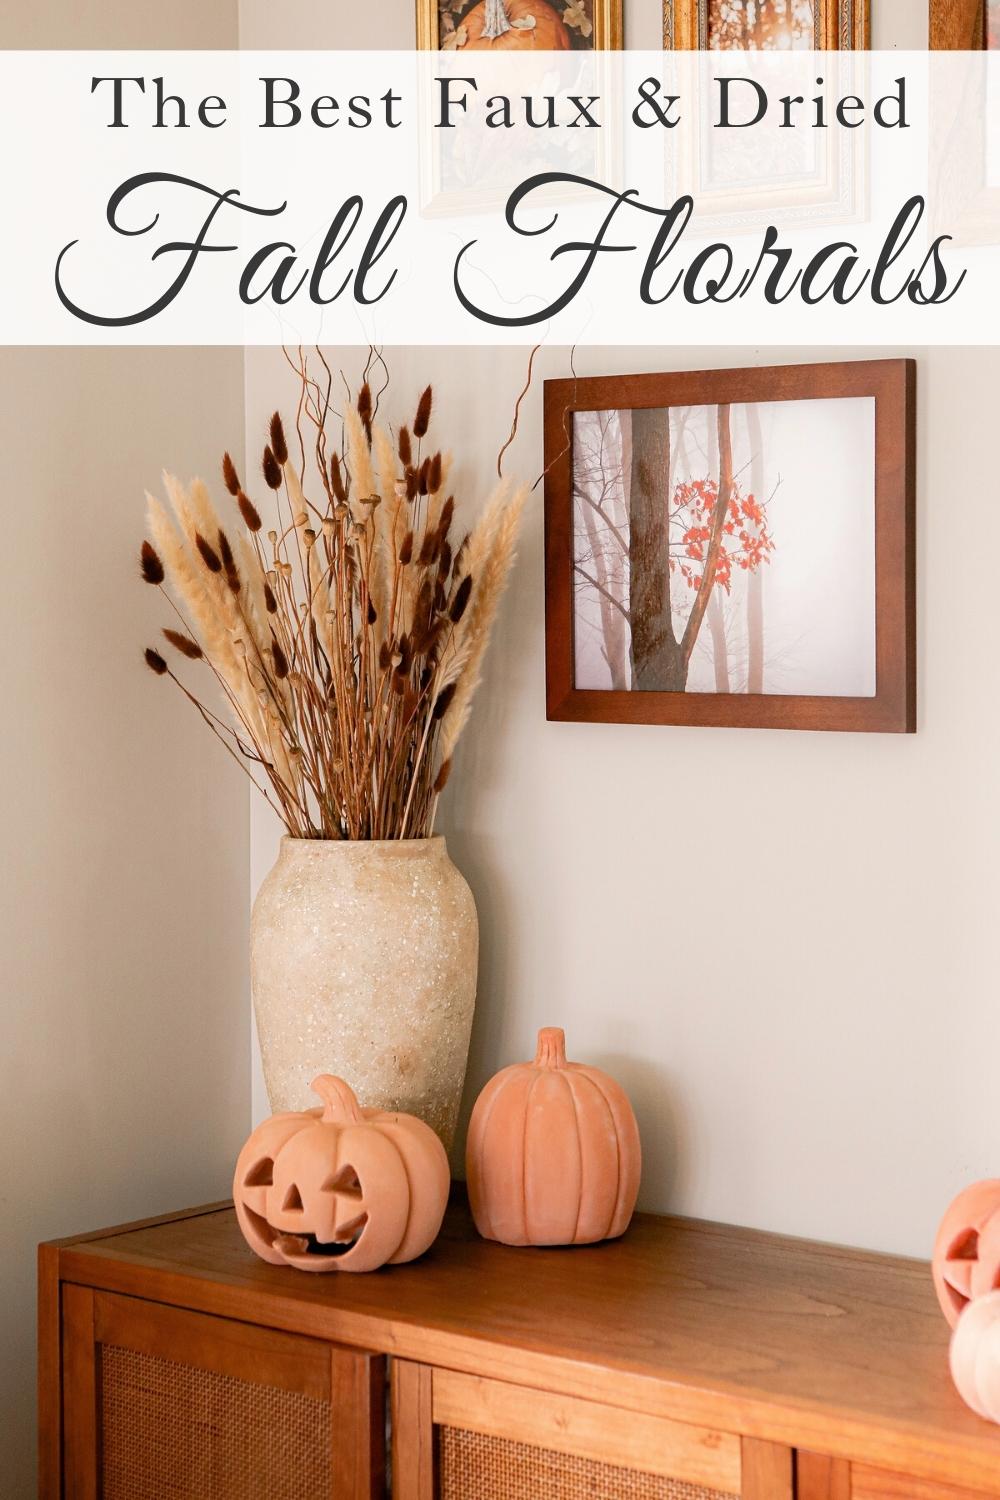 The Best Faux & Dried Flowers for fall